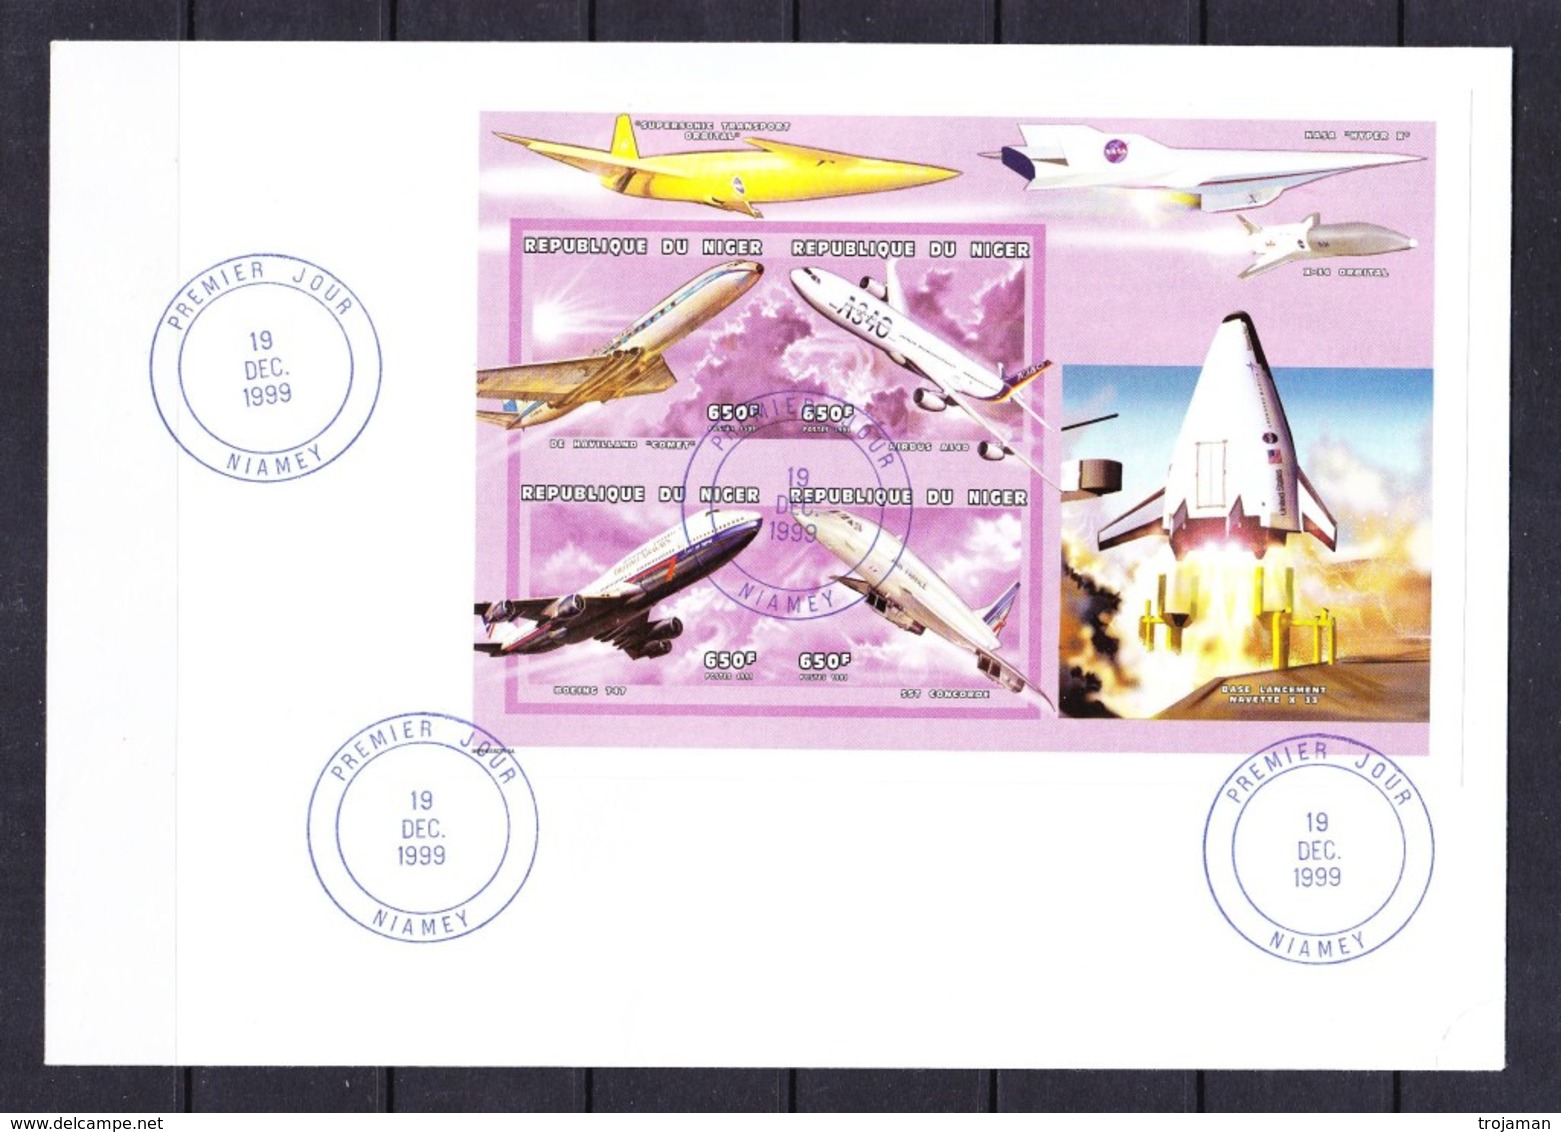 FDC-14 NIGER - 1999. UNPERFORATED. - Afrika